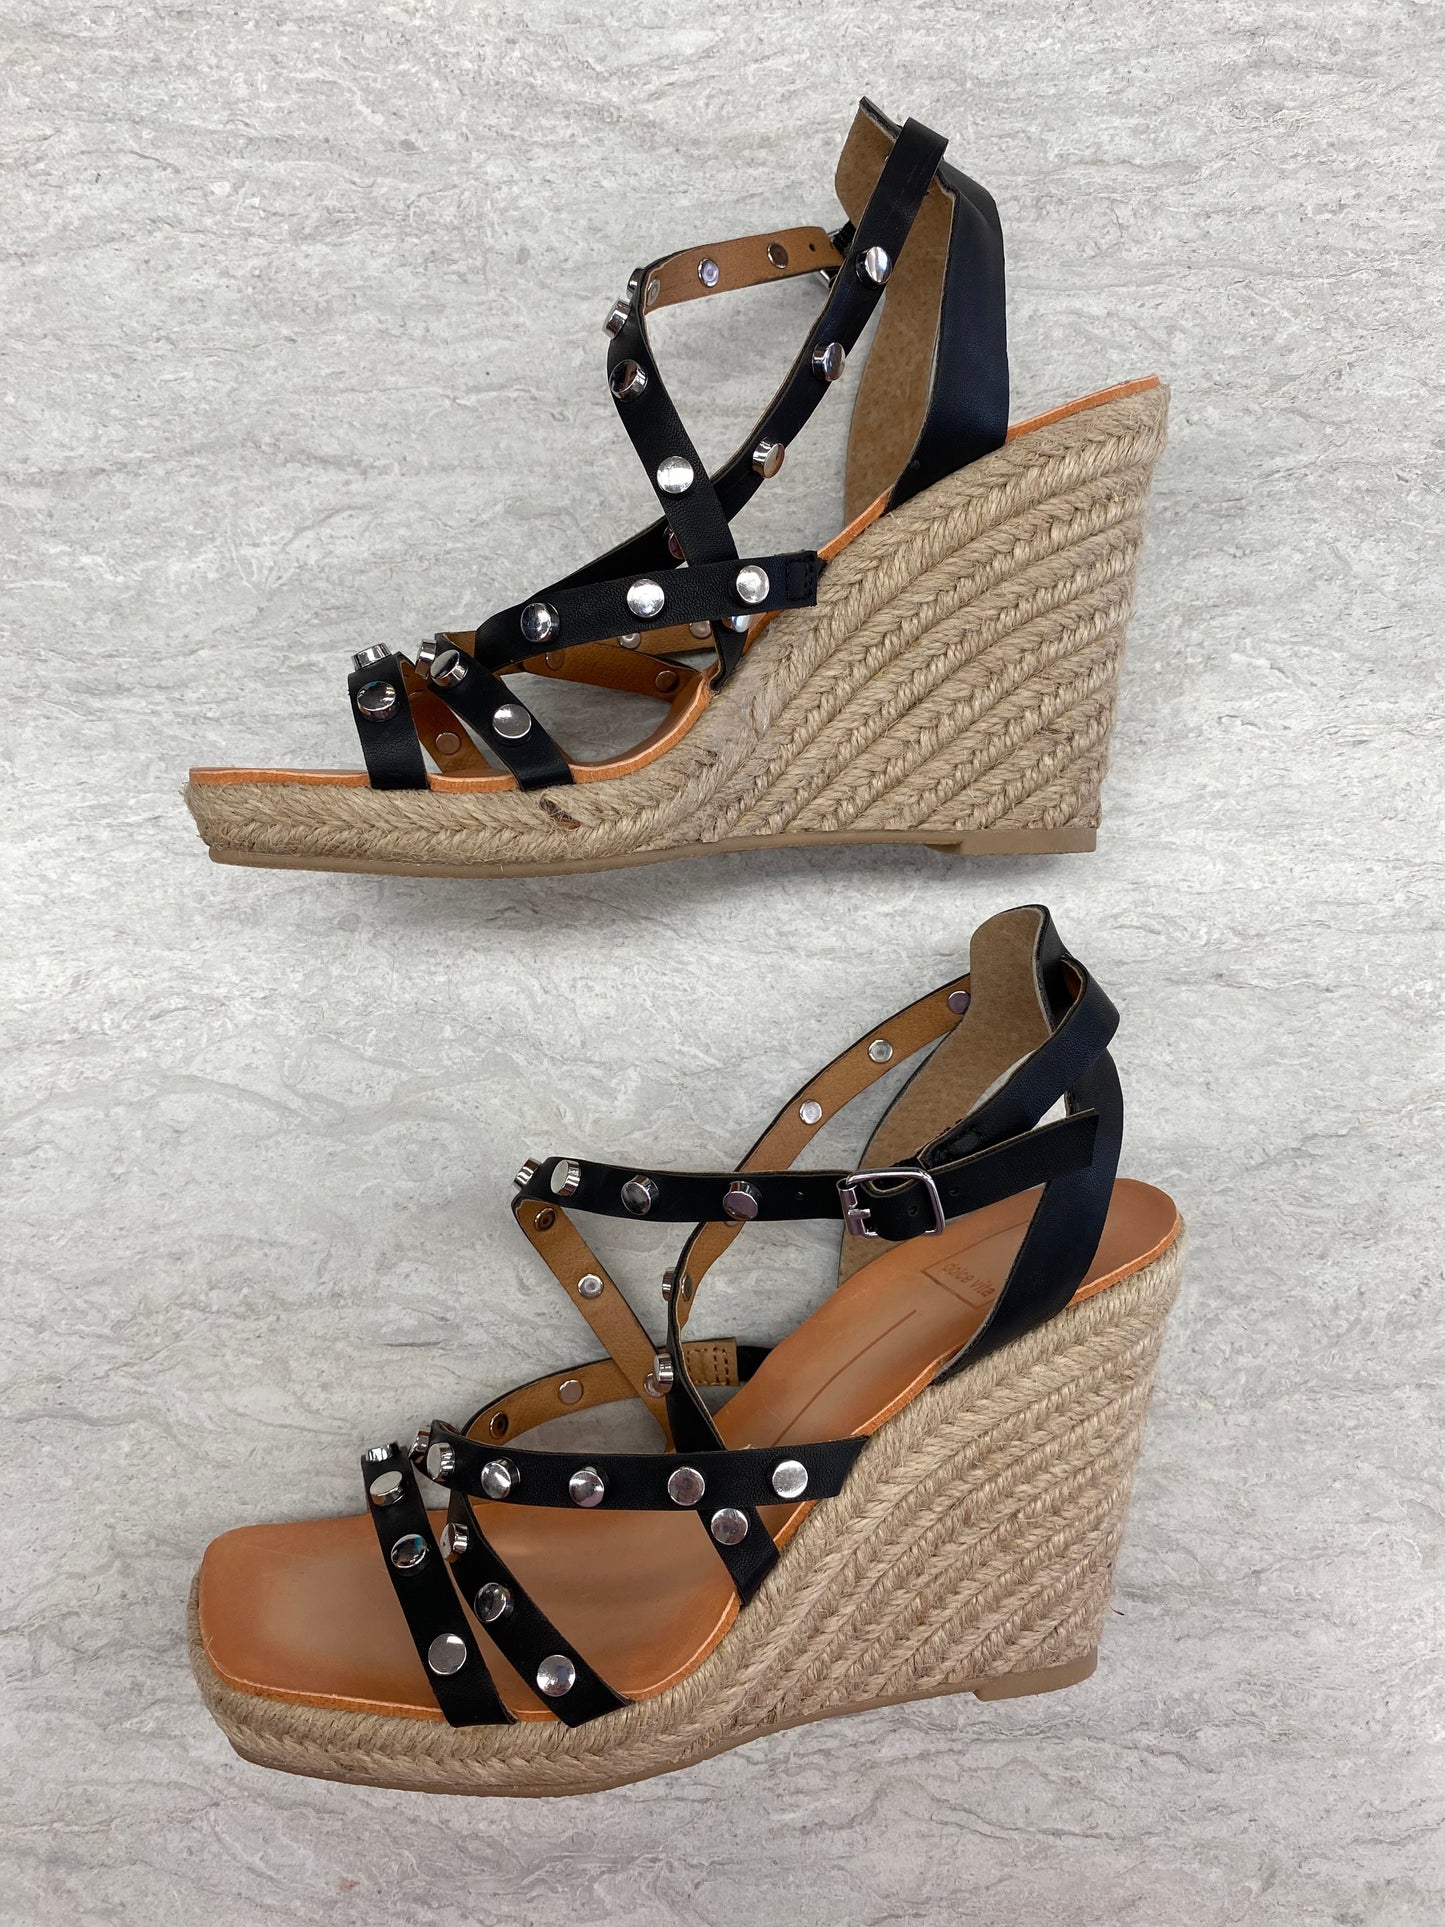 Sandals Heels Wedge By Dolce Vita  Size: 6.5